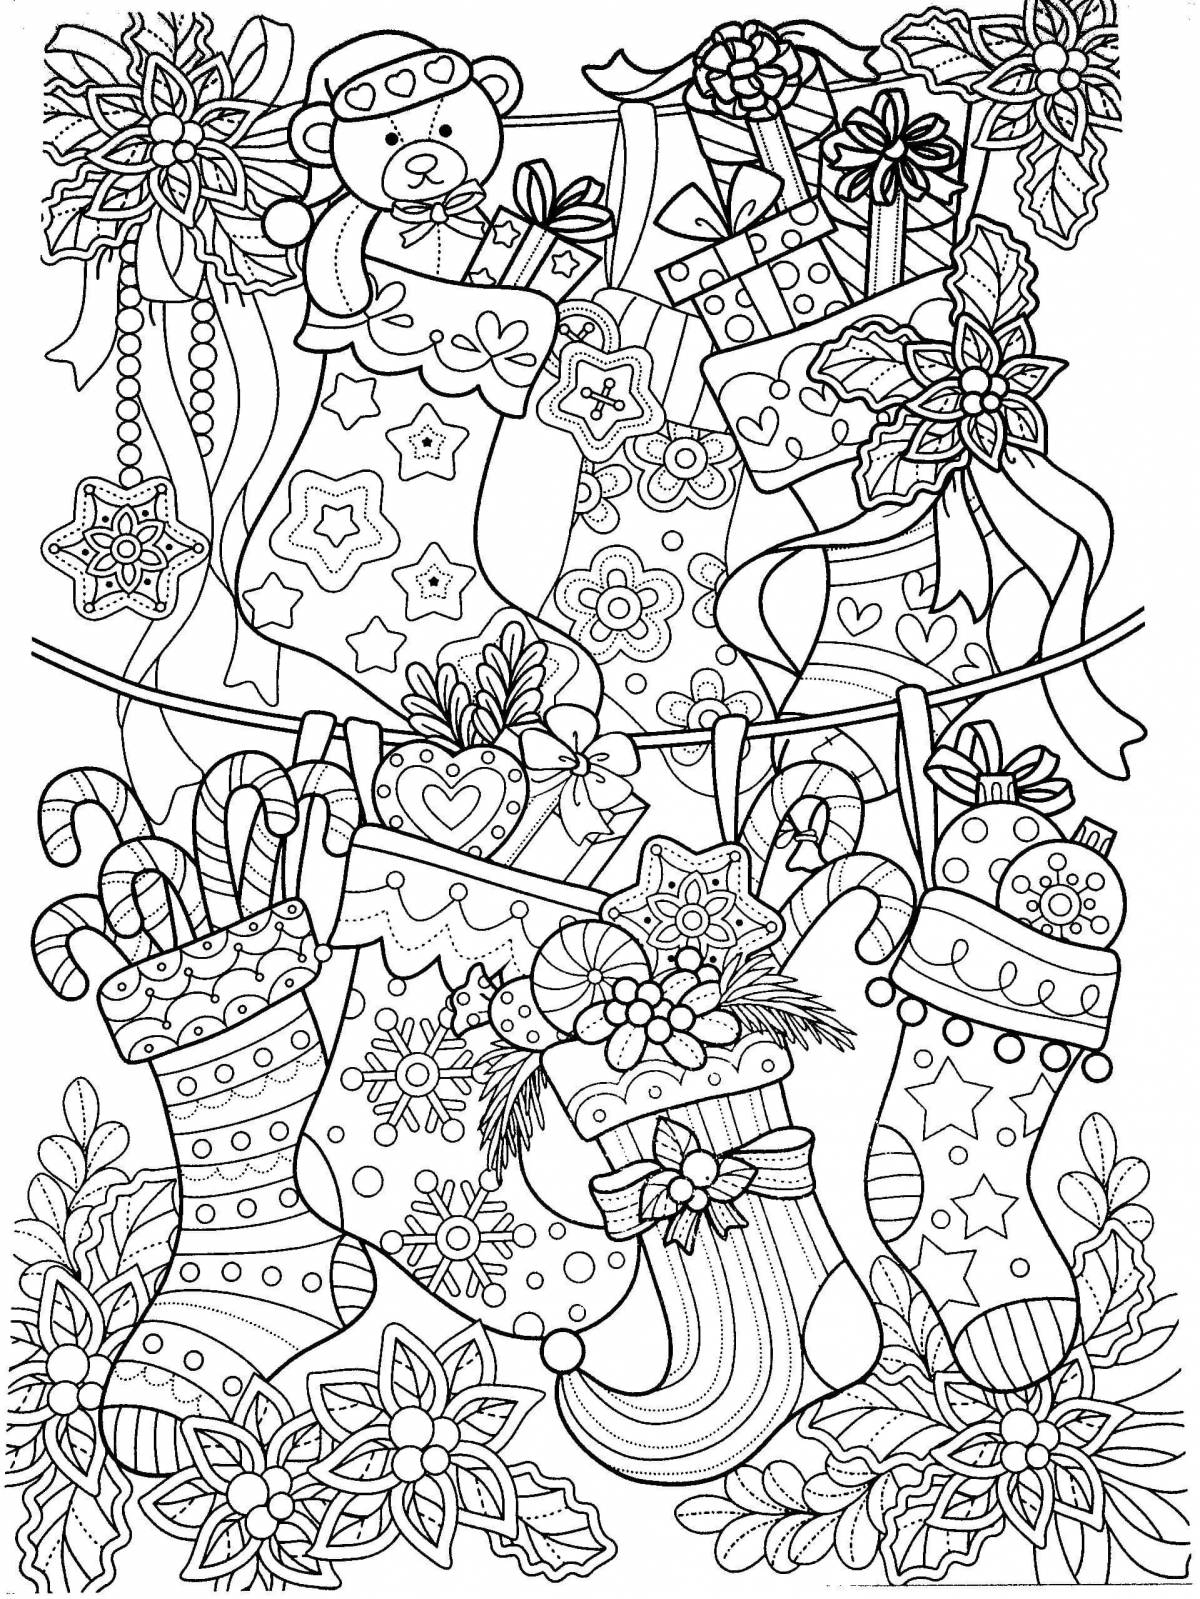 Amazingly cool Christmas coloring book